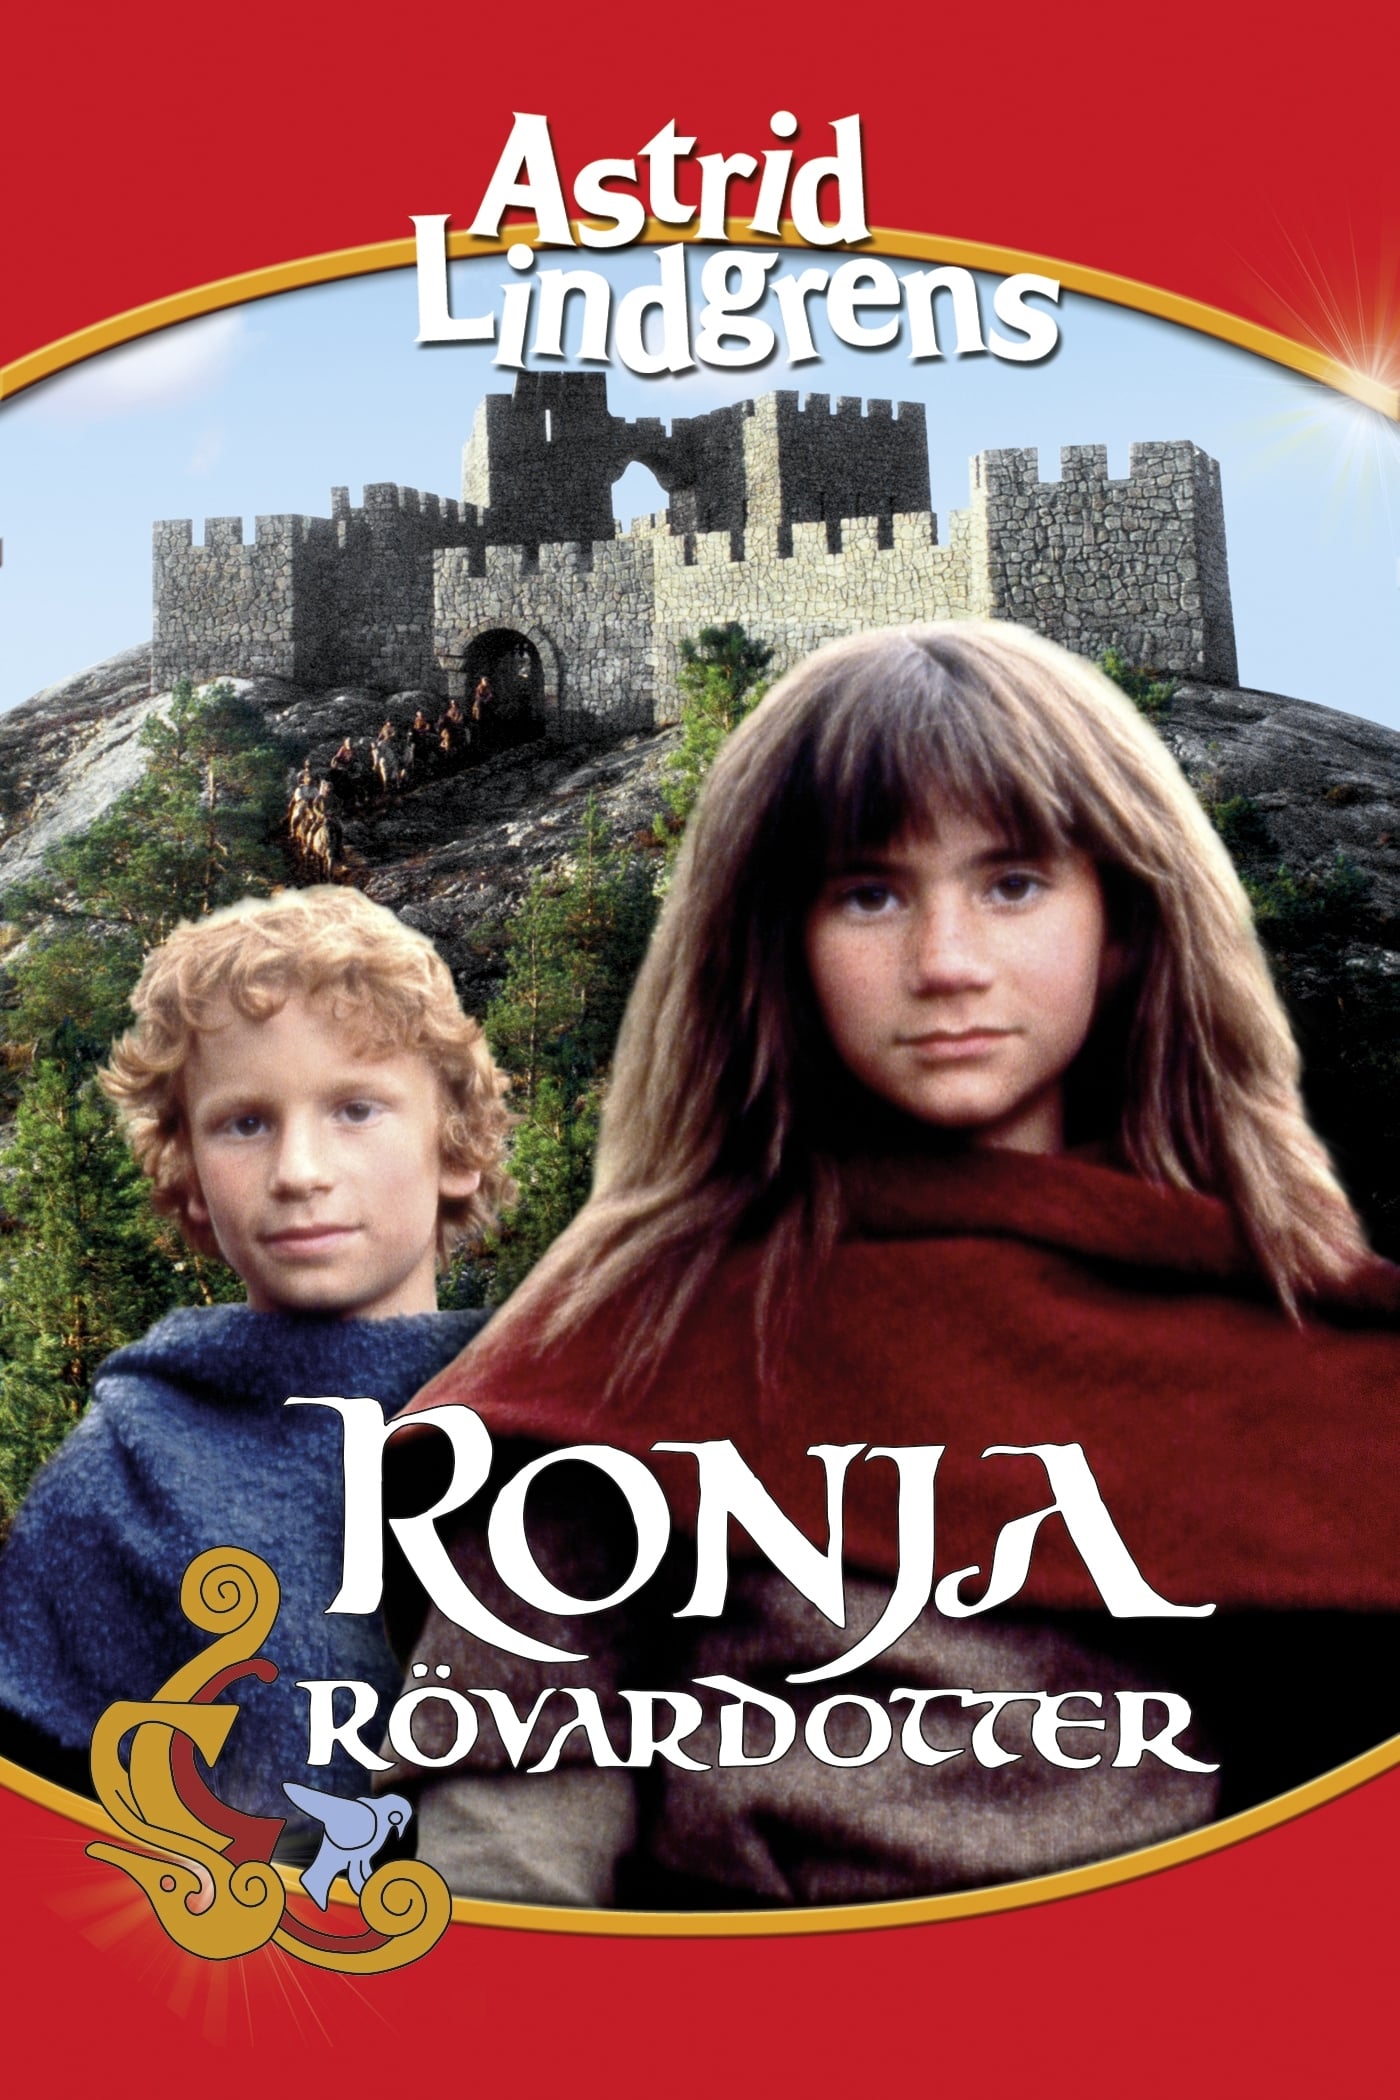 Ronia, The Robber's Daughter (1984)